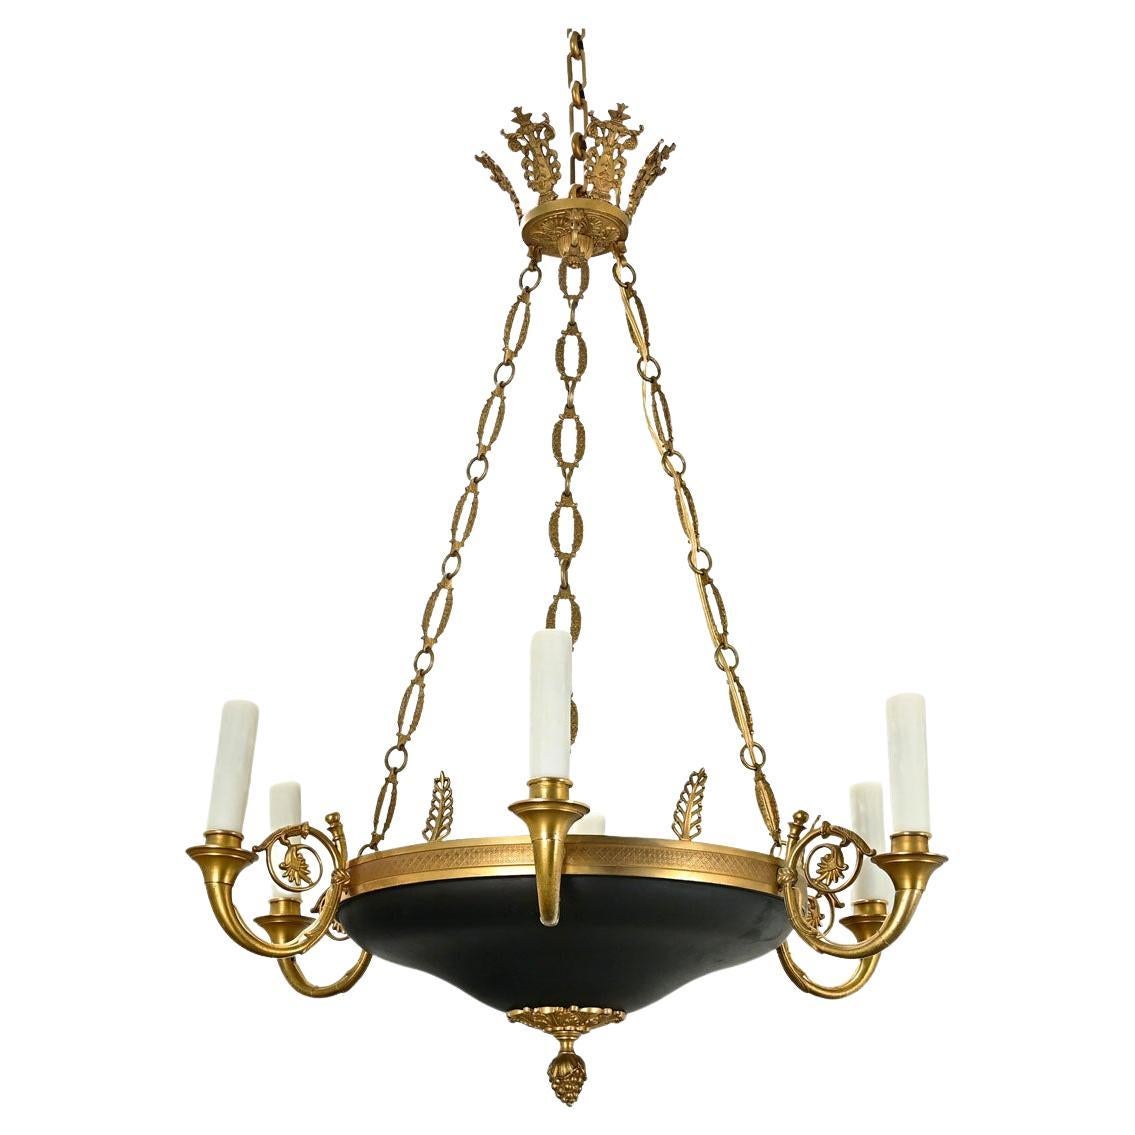 French 8-Light Empire Style Chandelier